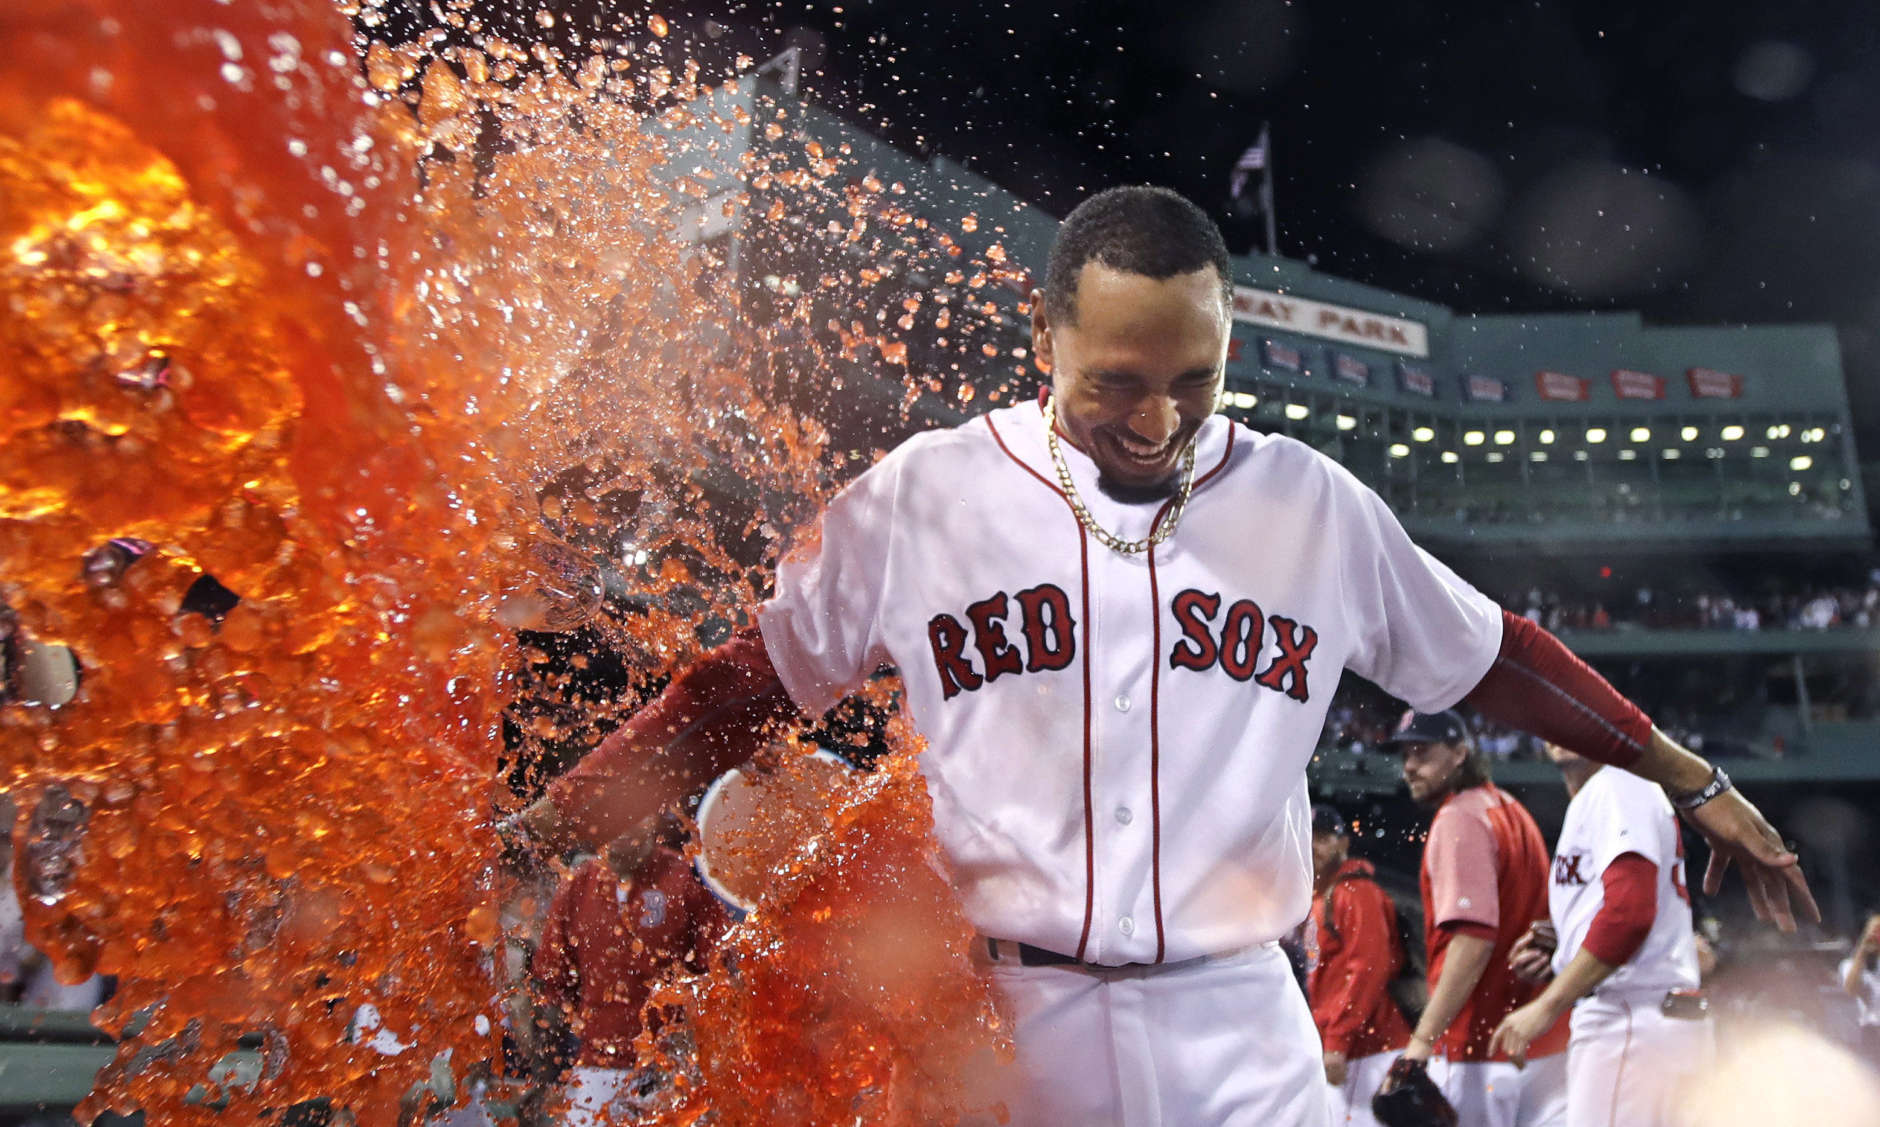 Boston Red Sox's Mookie Betts is doused after his walk-off two-run double during the ninth inning of a baseball game against the St. Louis Cardinals in Boston, Wednesday, Aug. 16, 2017. The Red Sox won 5-4. (AP Photo/Charles Krupa)